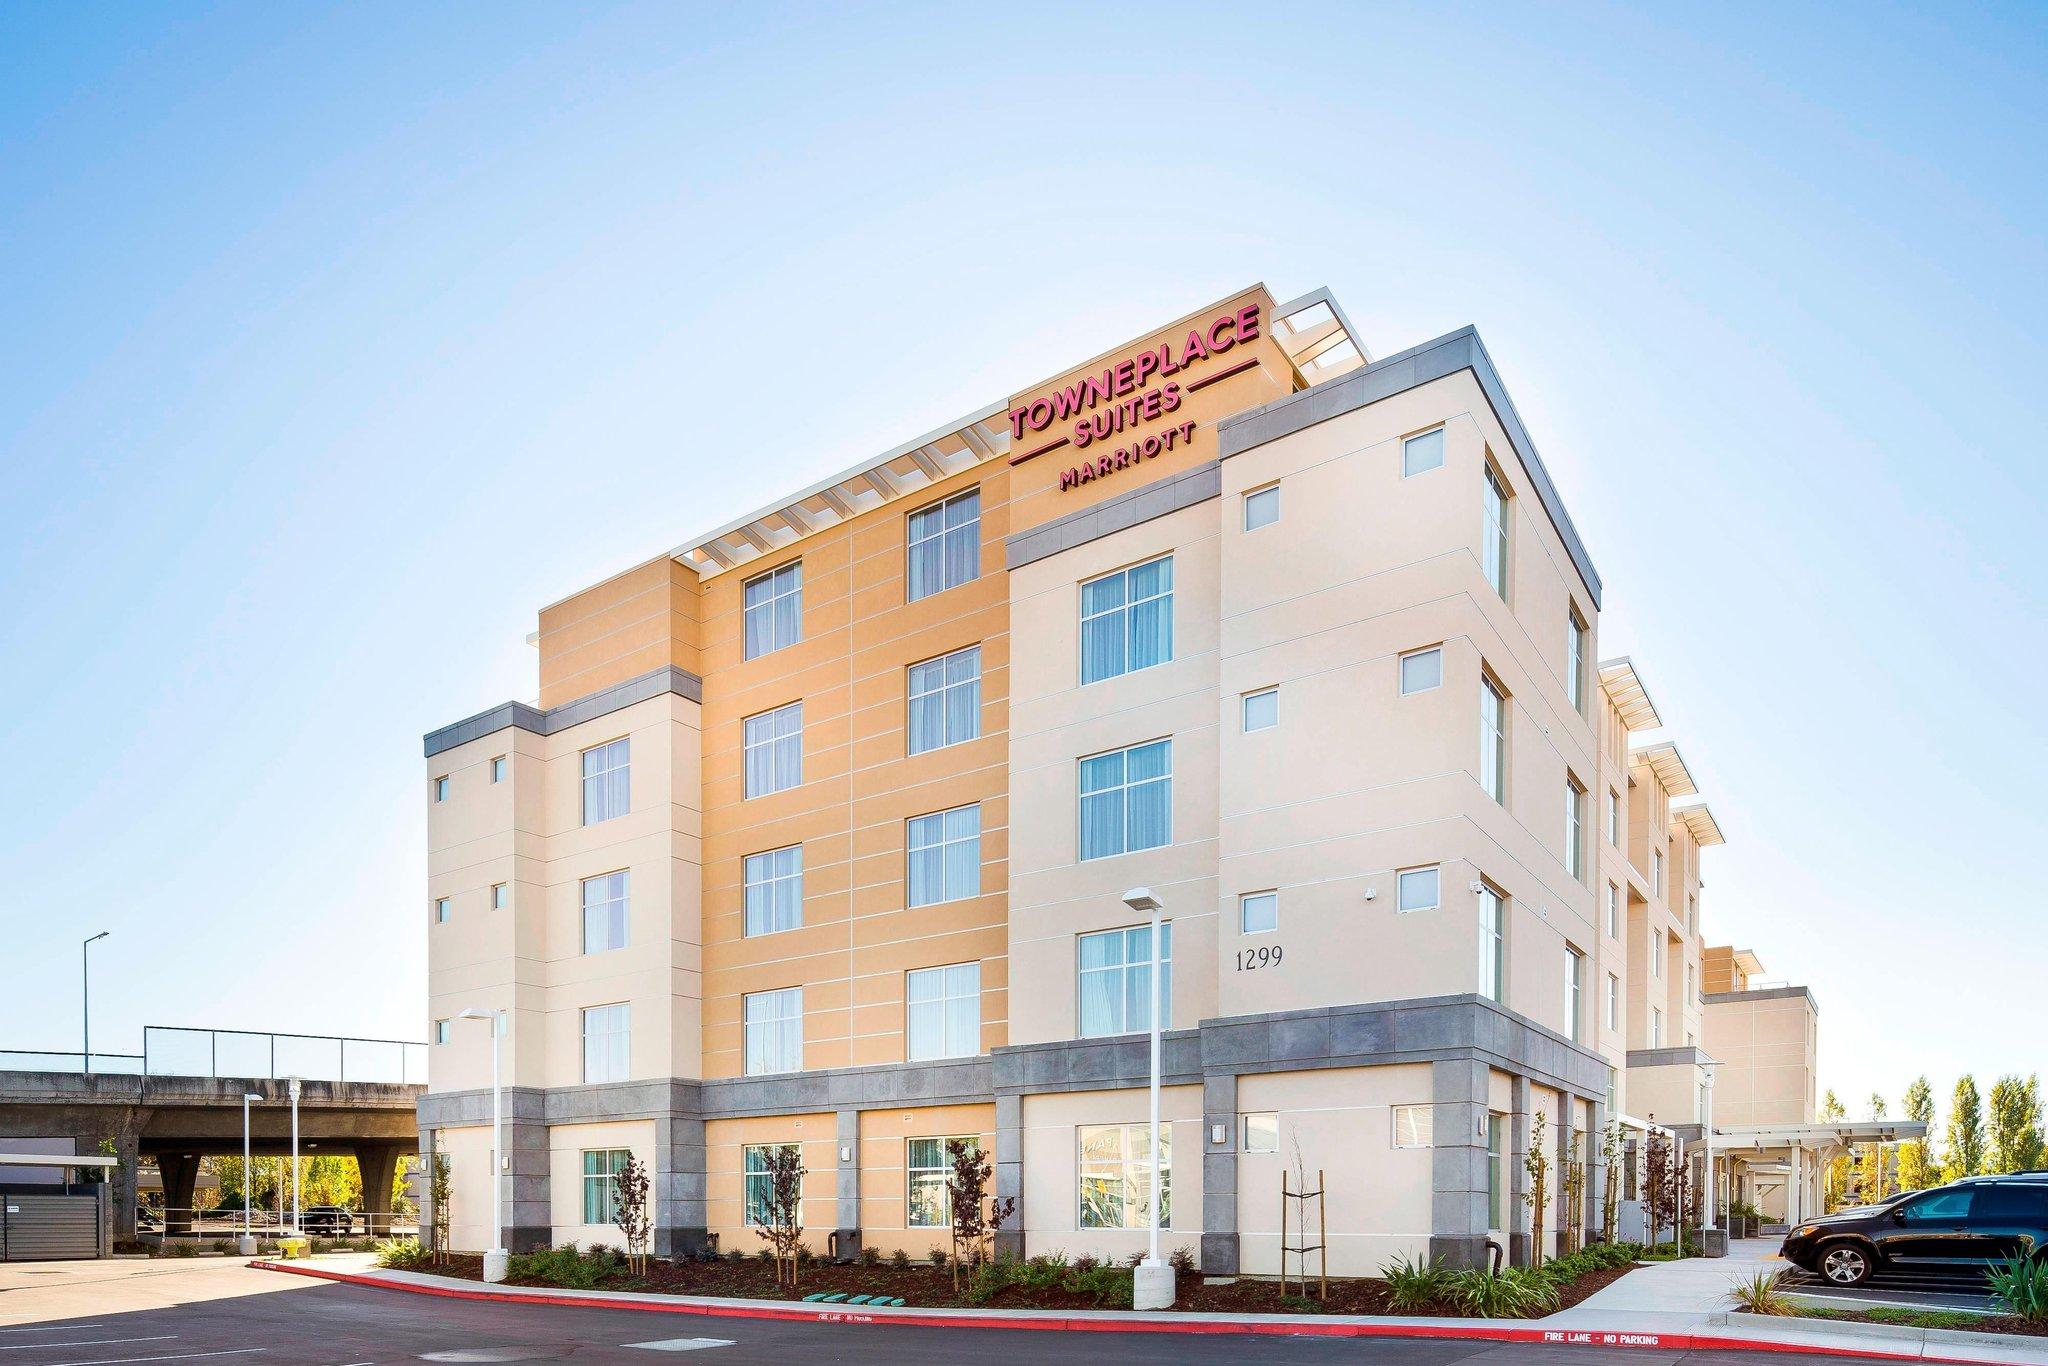 TownePlace Suites San Mateo Foster City in Foster City, CA